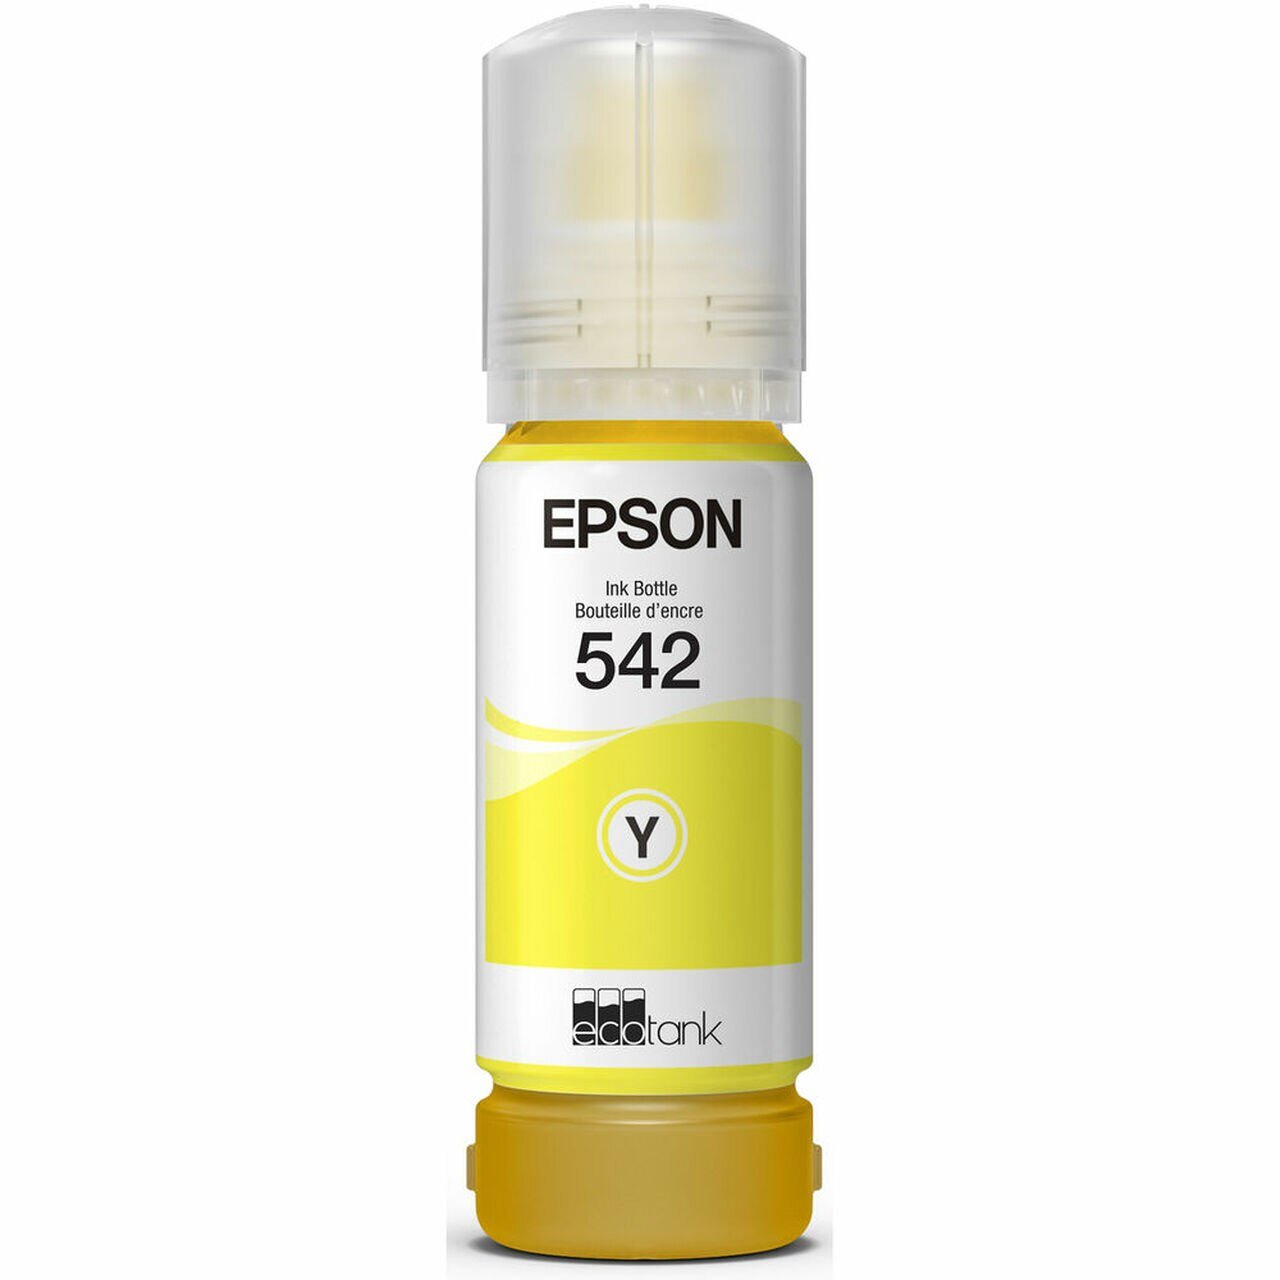 Epson OEM 542 Yellow Ink Bottle - Click to enlarge